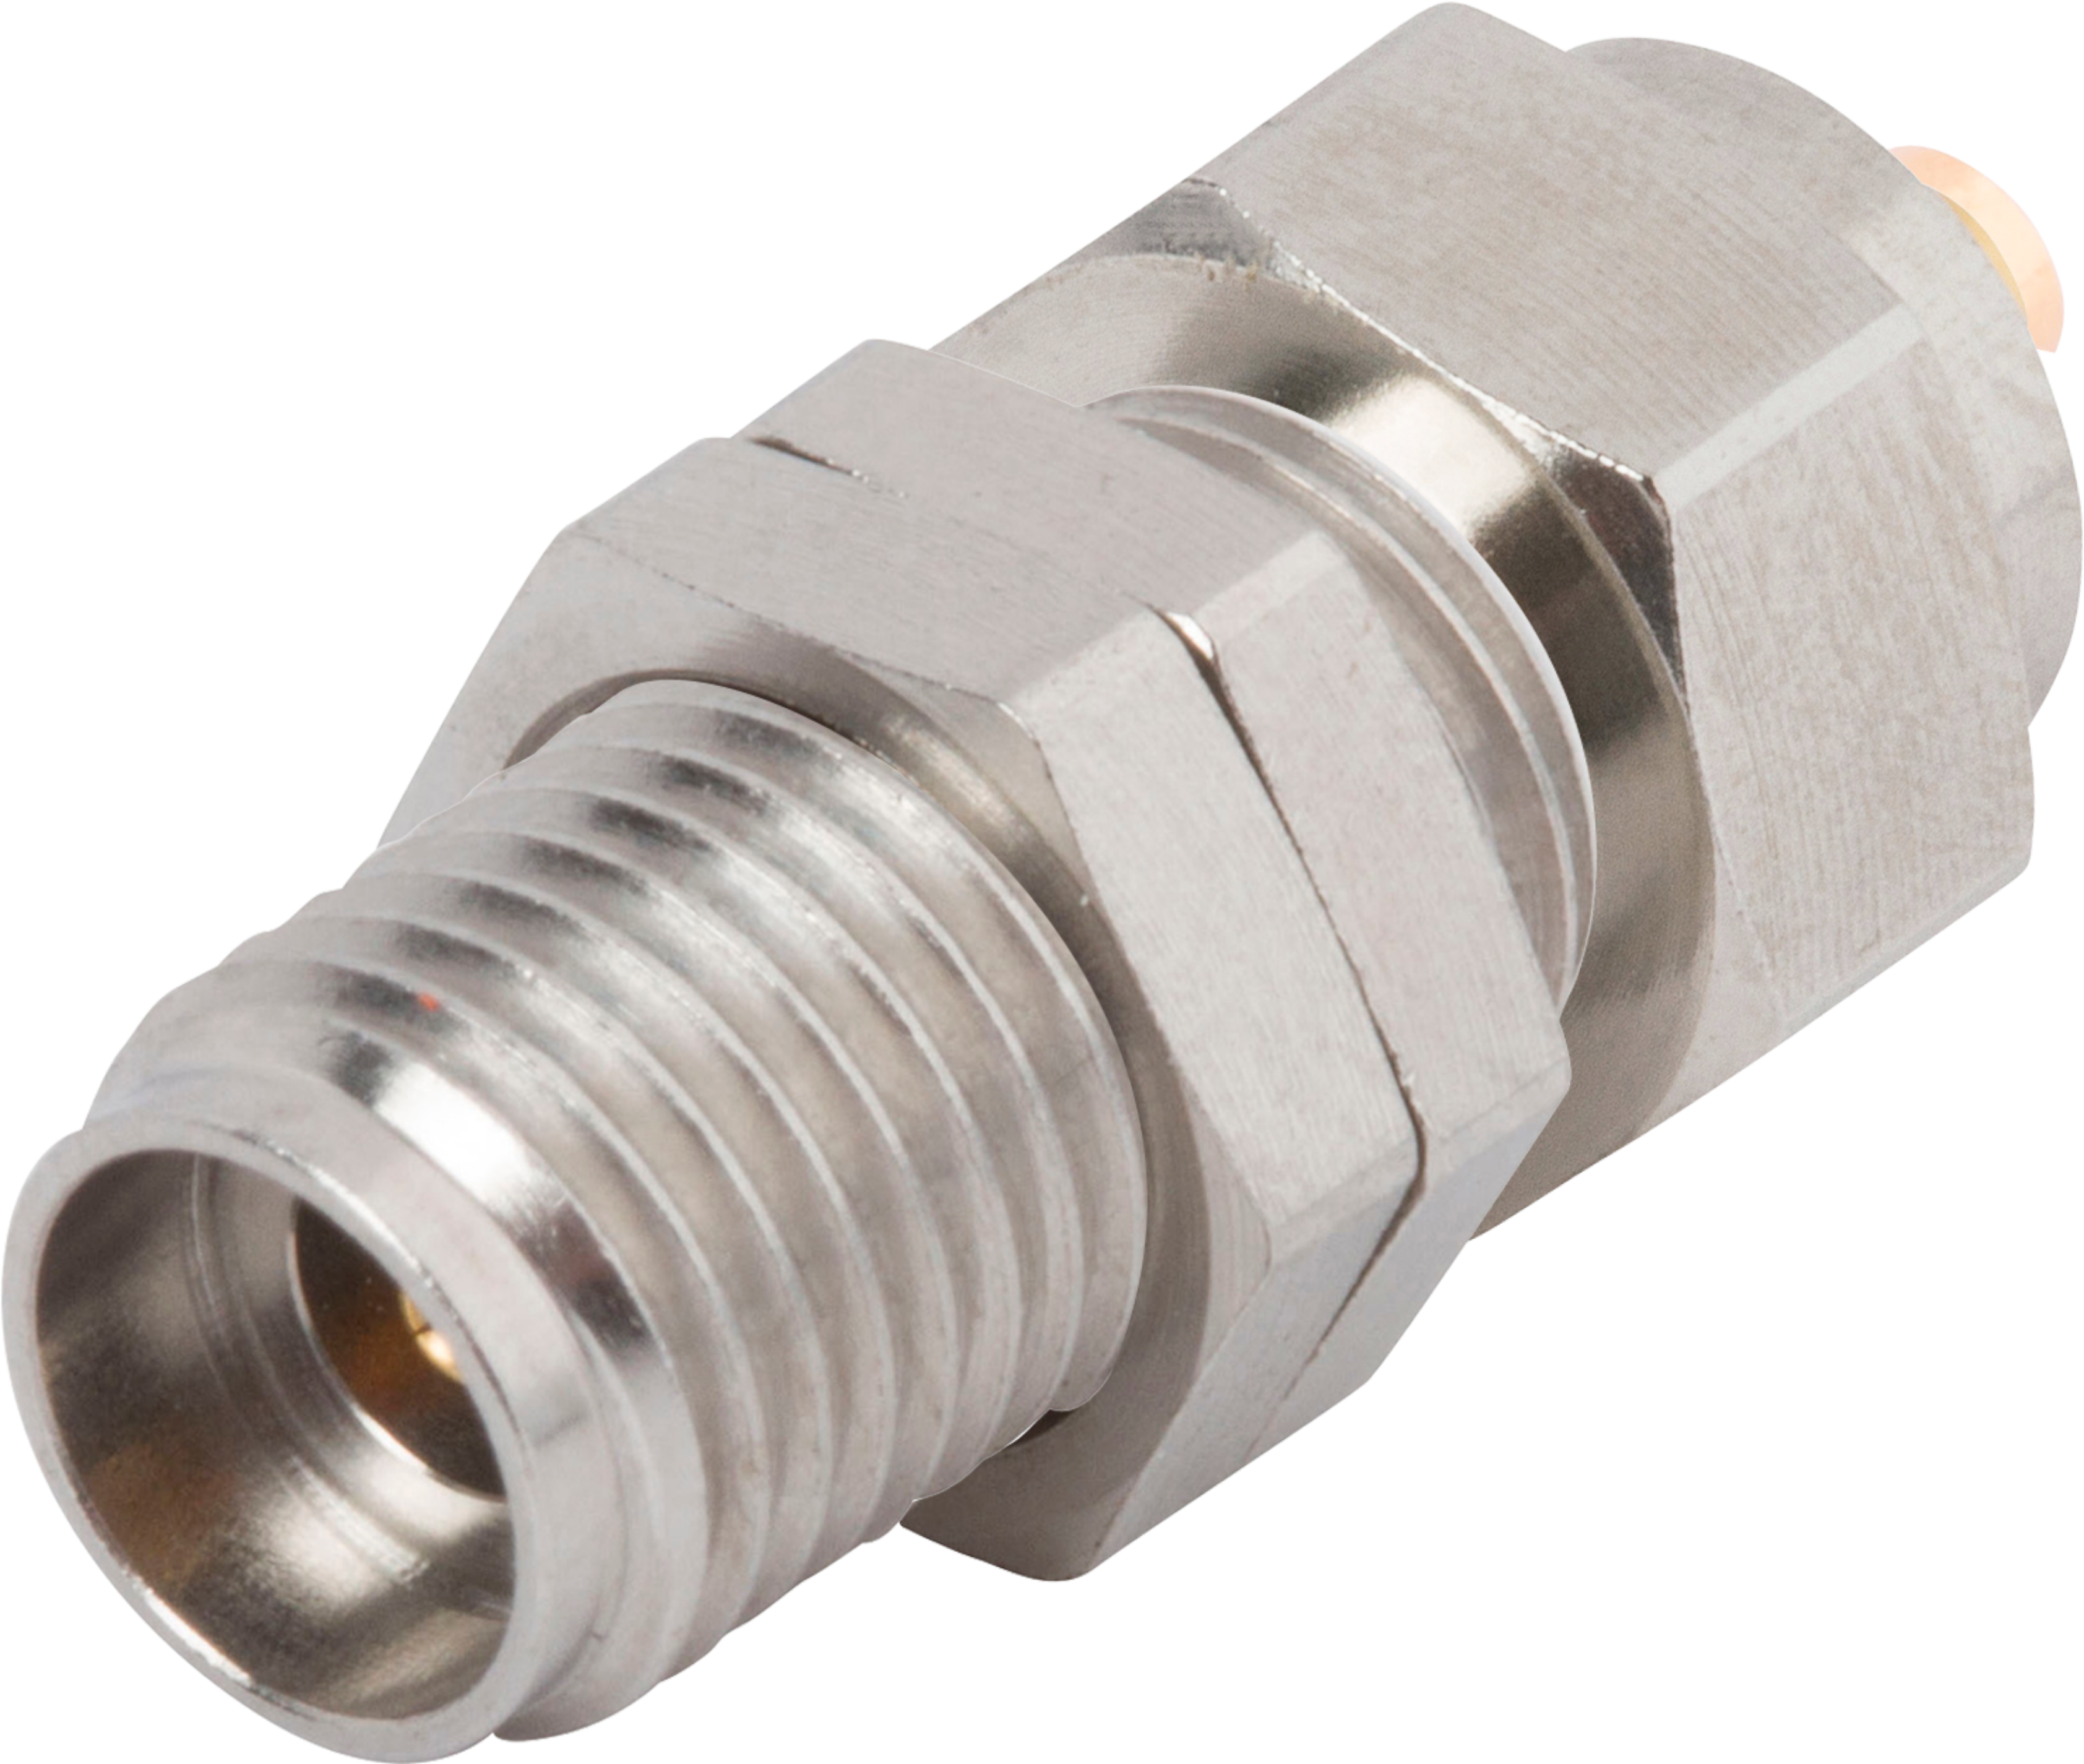 2.92mm Female Bulkhead Connector for .141 Cable, SF1521-60044